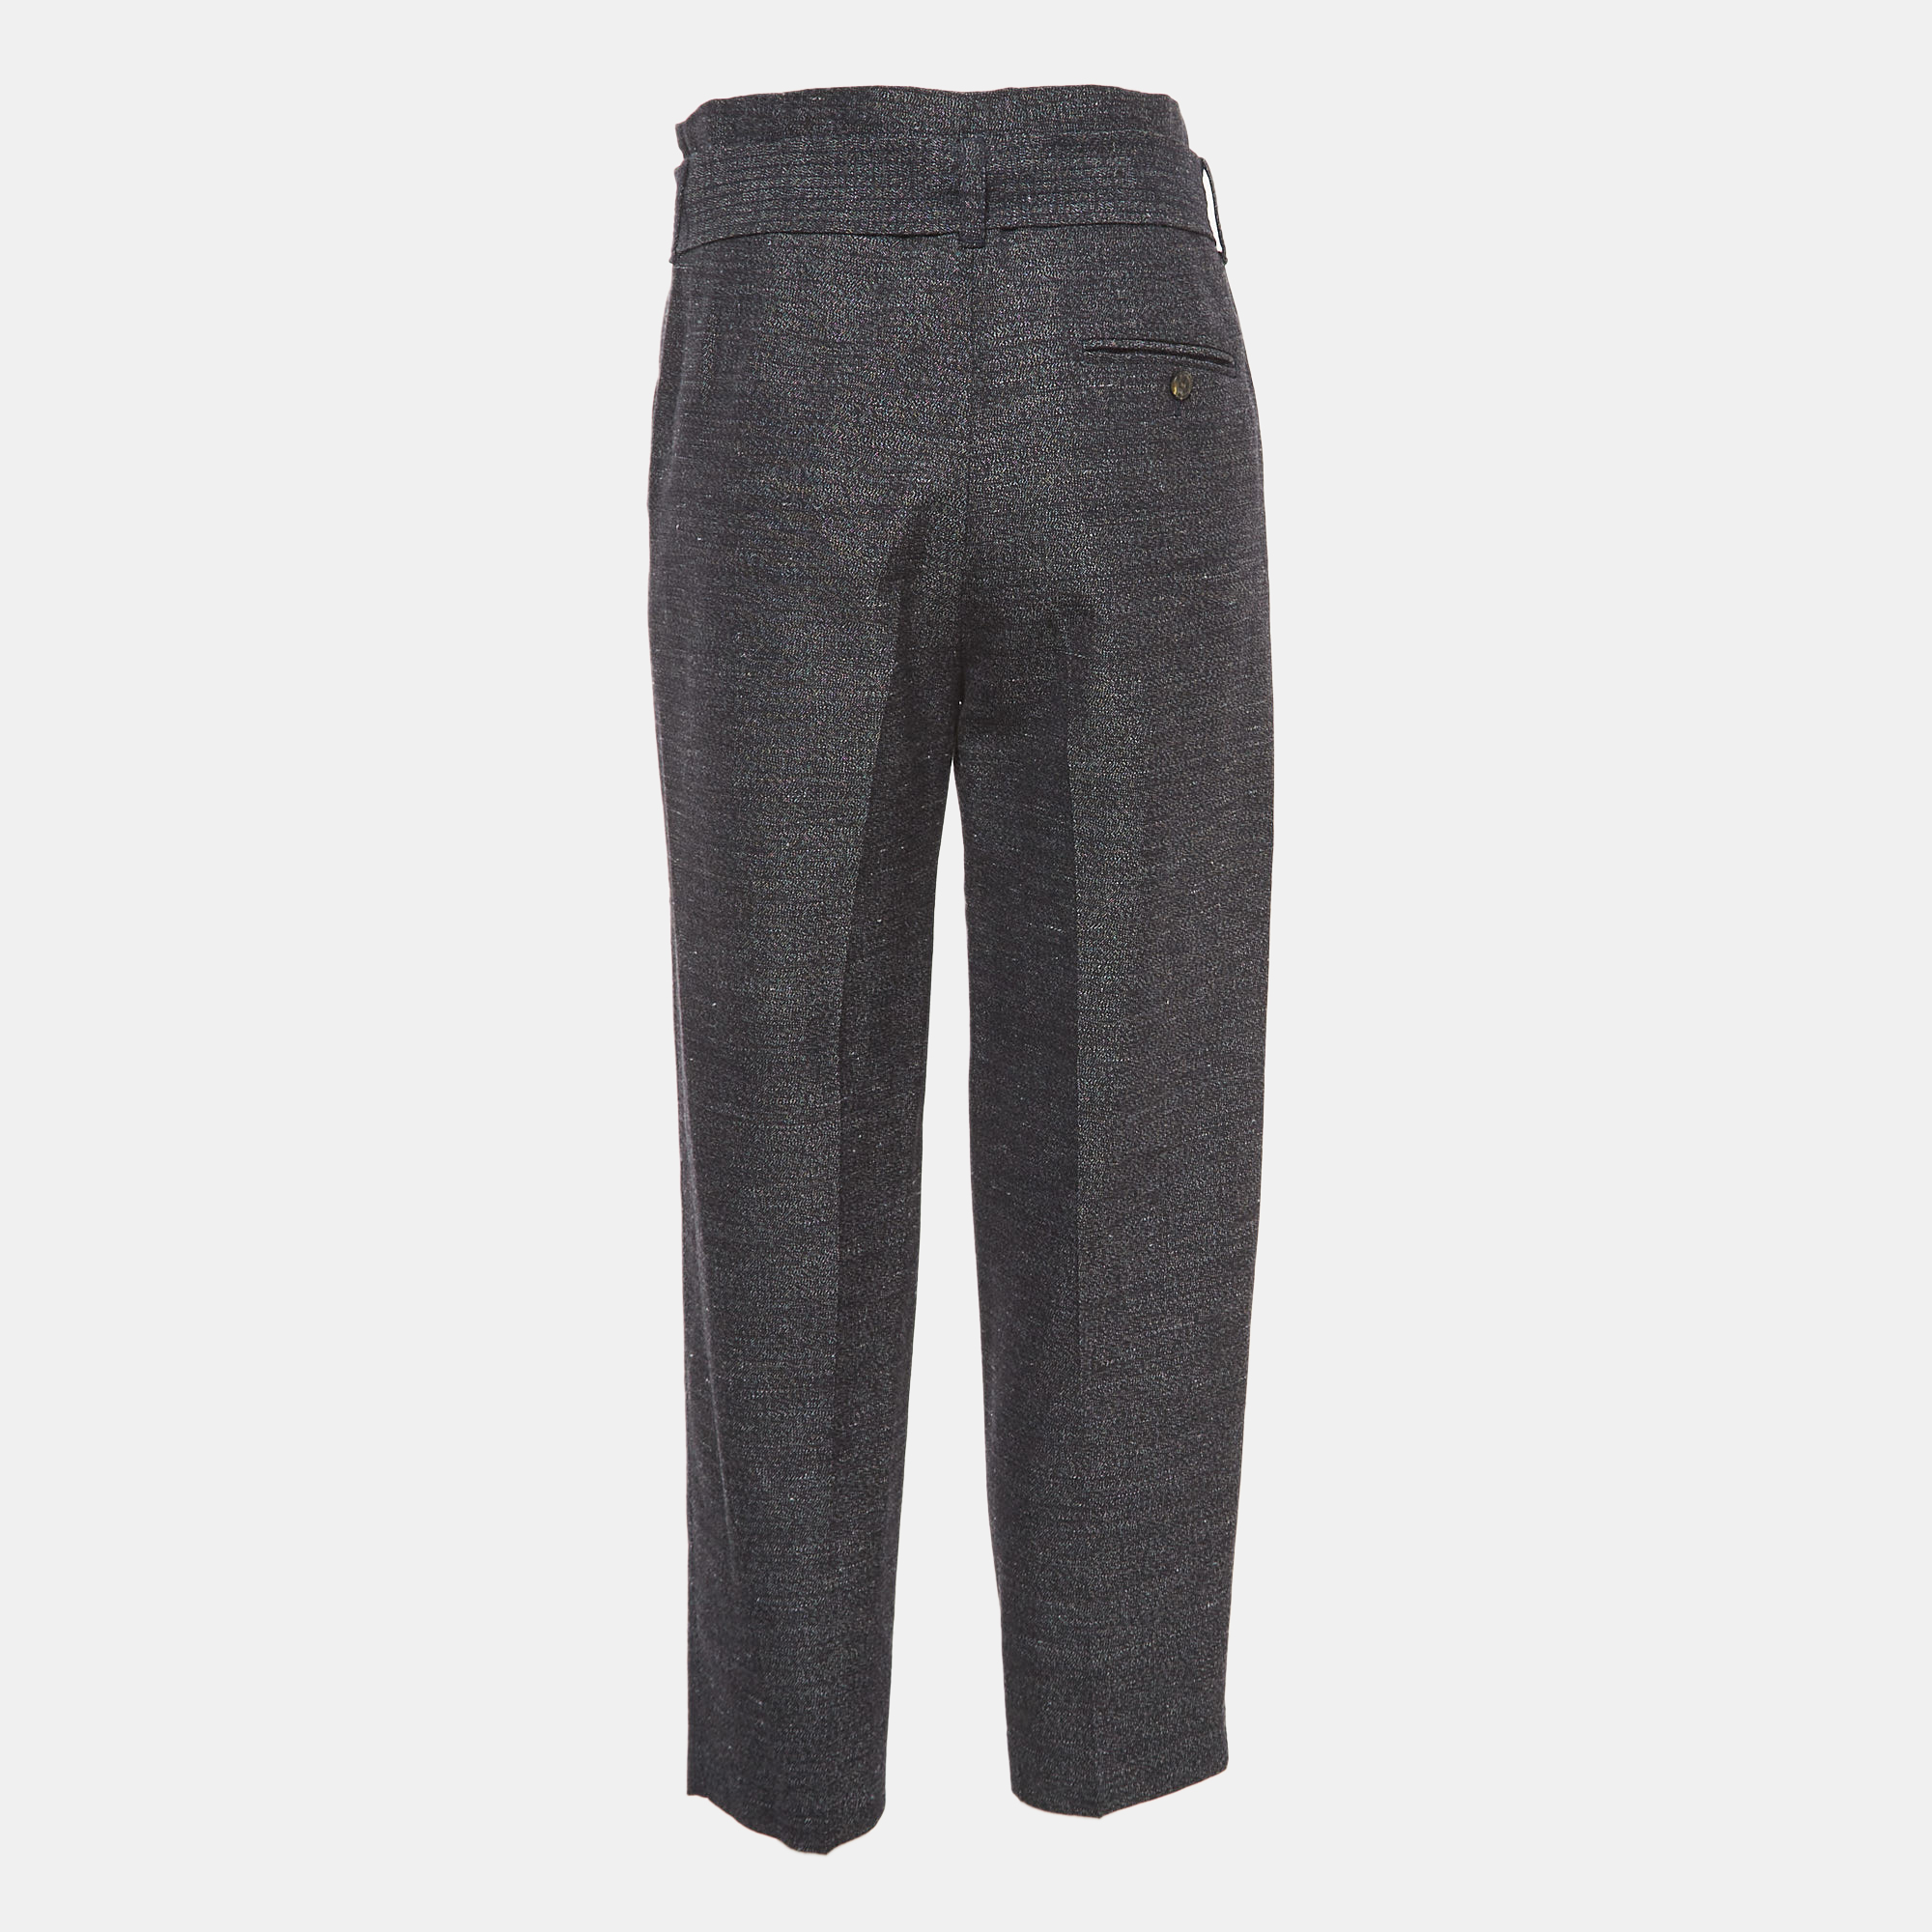 

3.1 Phillip Lim Navy Blue Patterned Wool Blend Belted Trousers